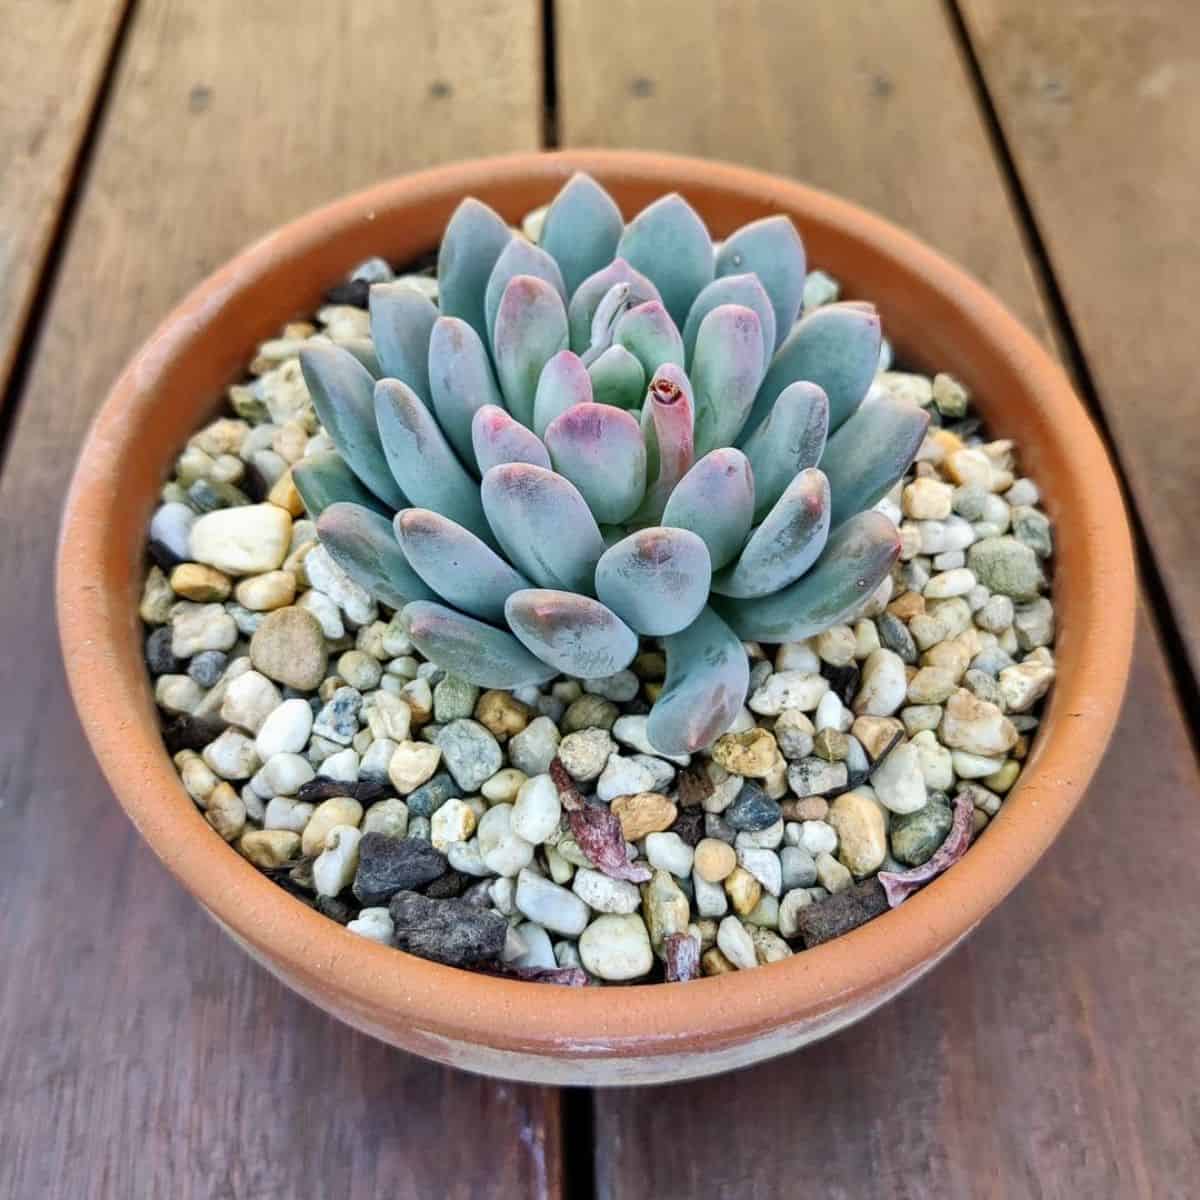 Pachyphytum clavifolia grows in a pot.